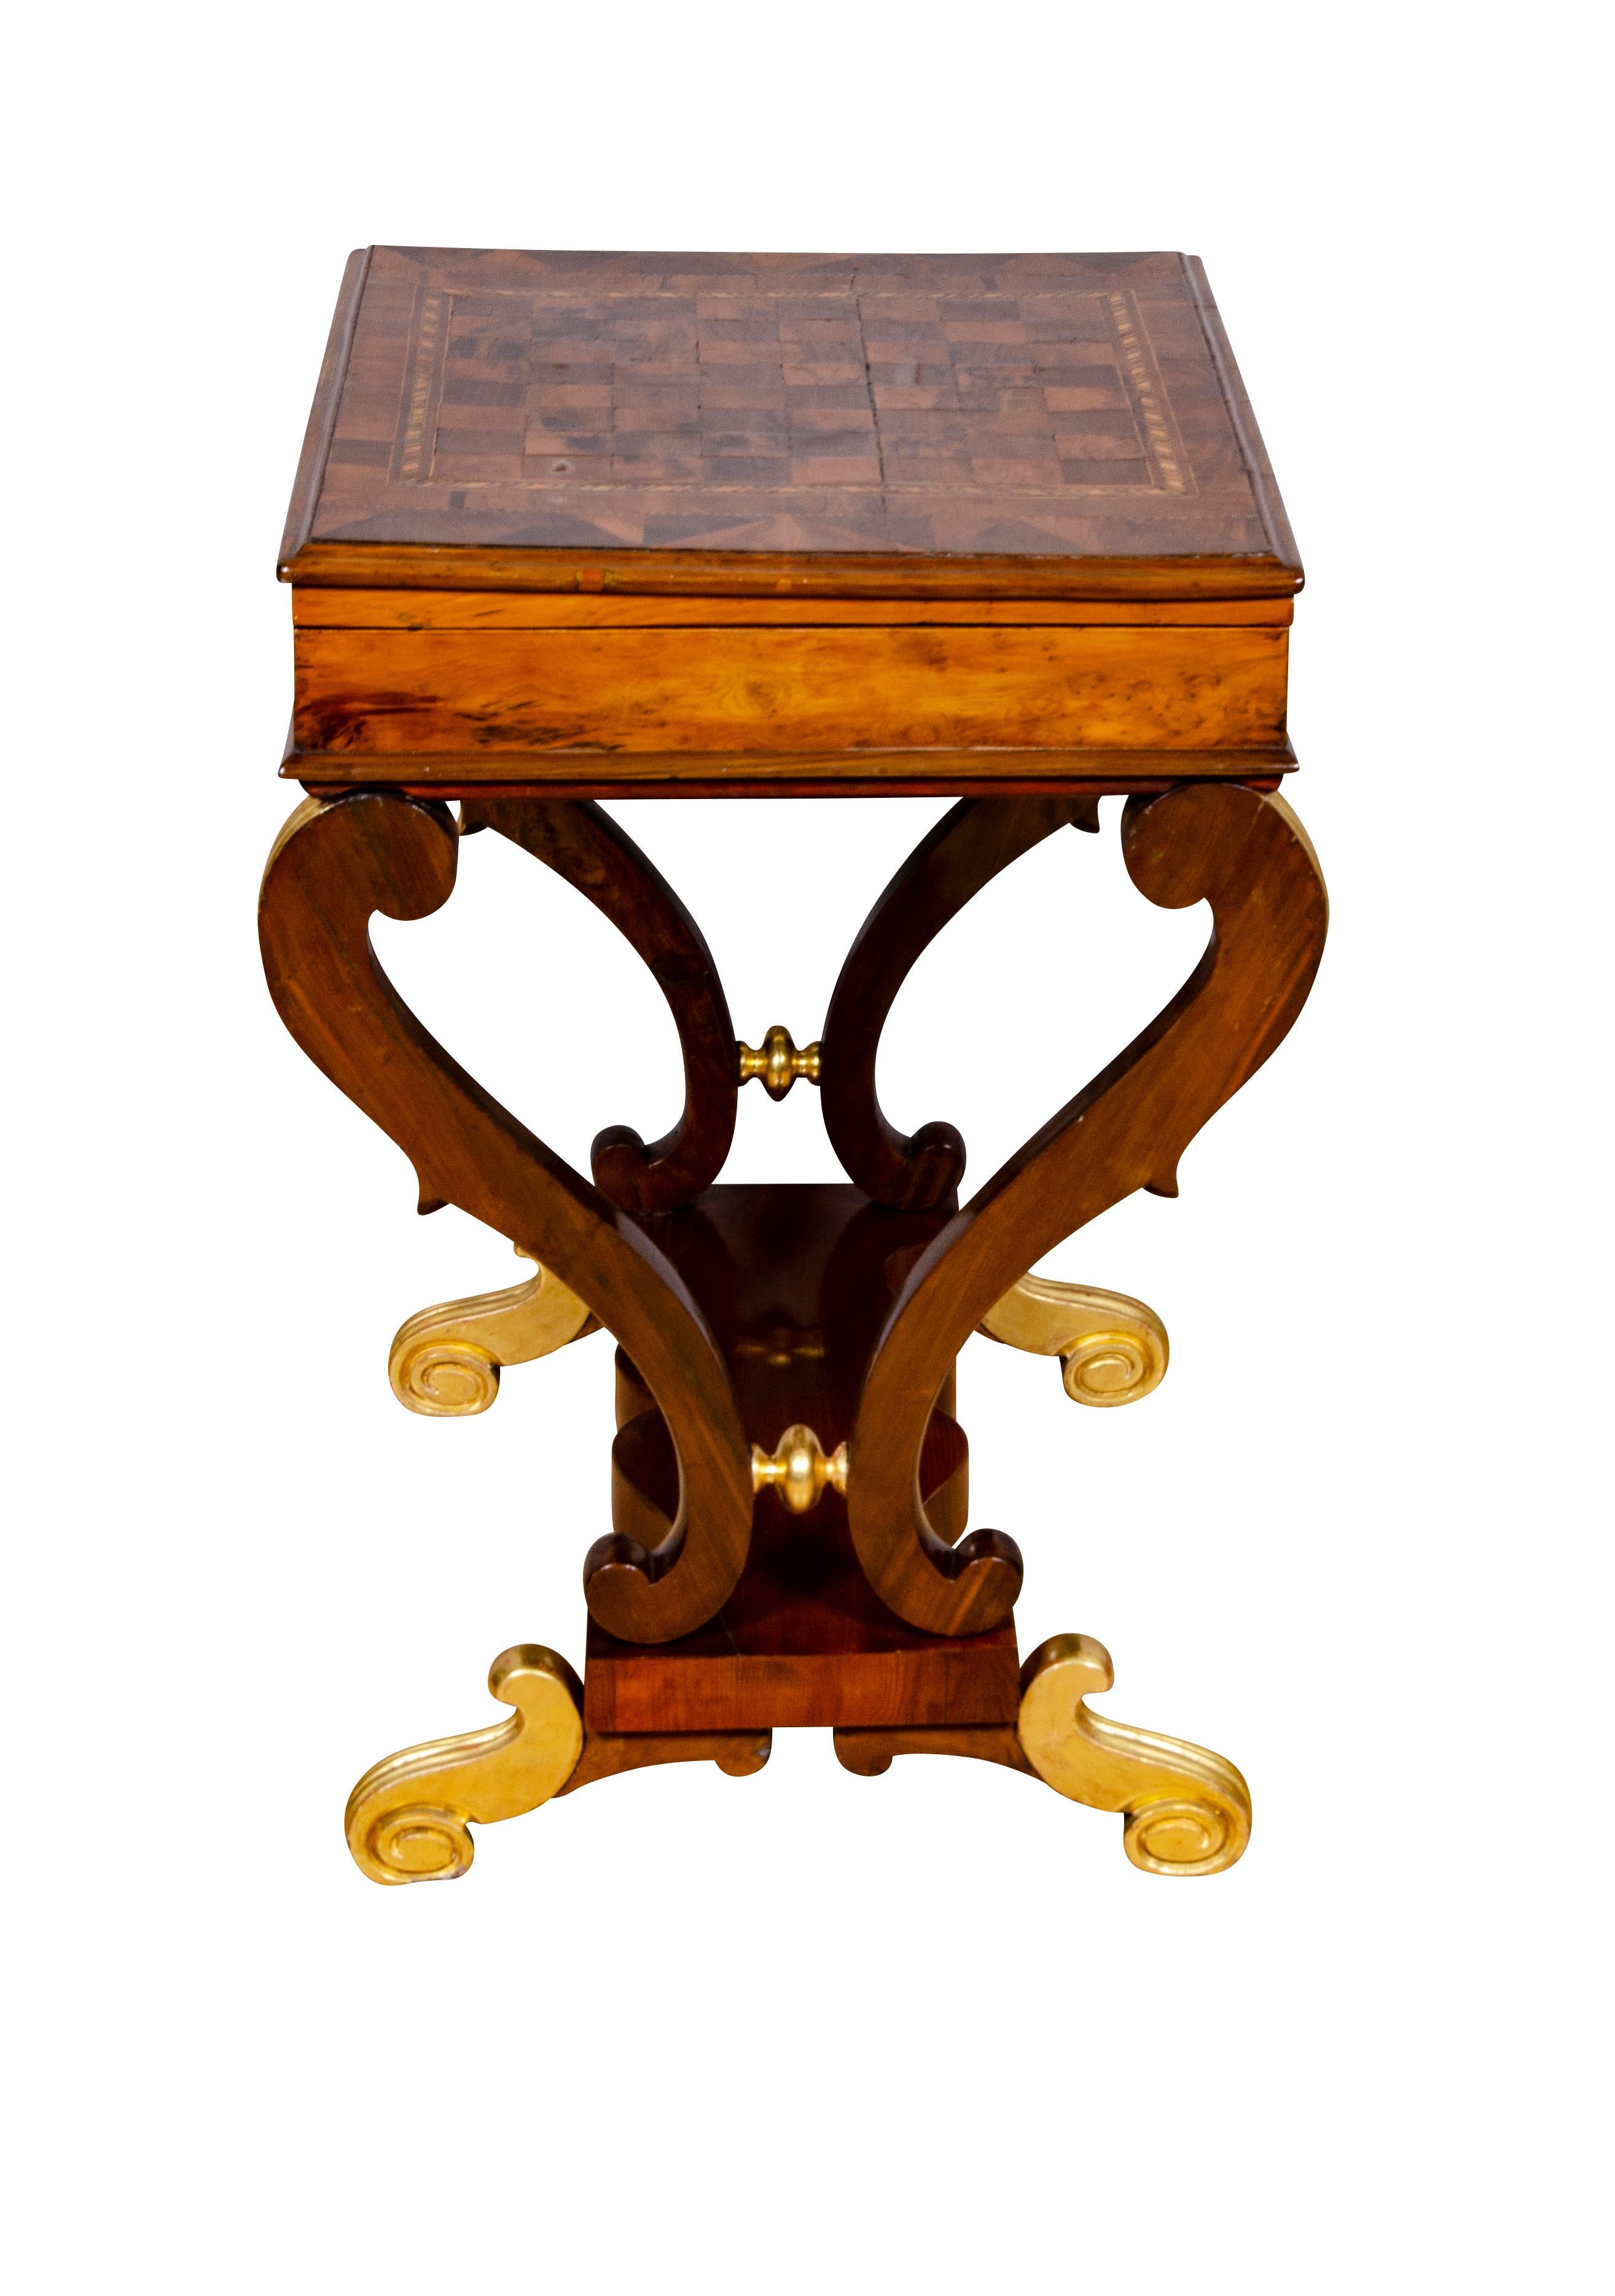 Baltic Neoclassic Yew Wood Games Table In Good Condition For Sale In Essex, MA